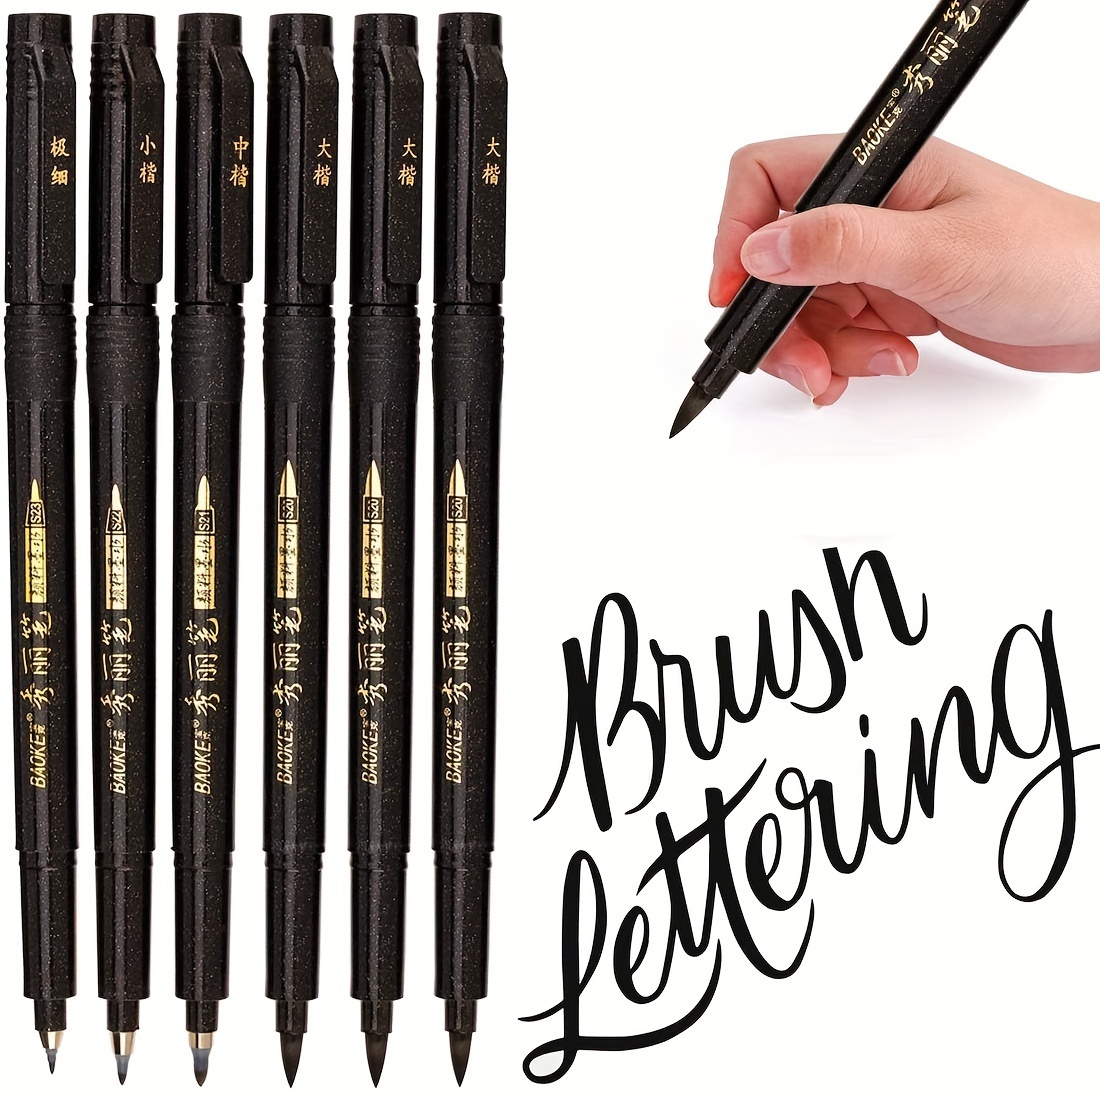 6pcs Calligraphy Pens set for Beginners,Hand Lettering Pen,4 Size